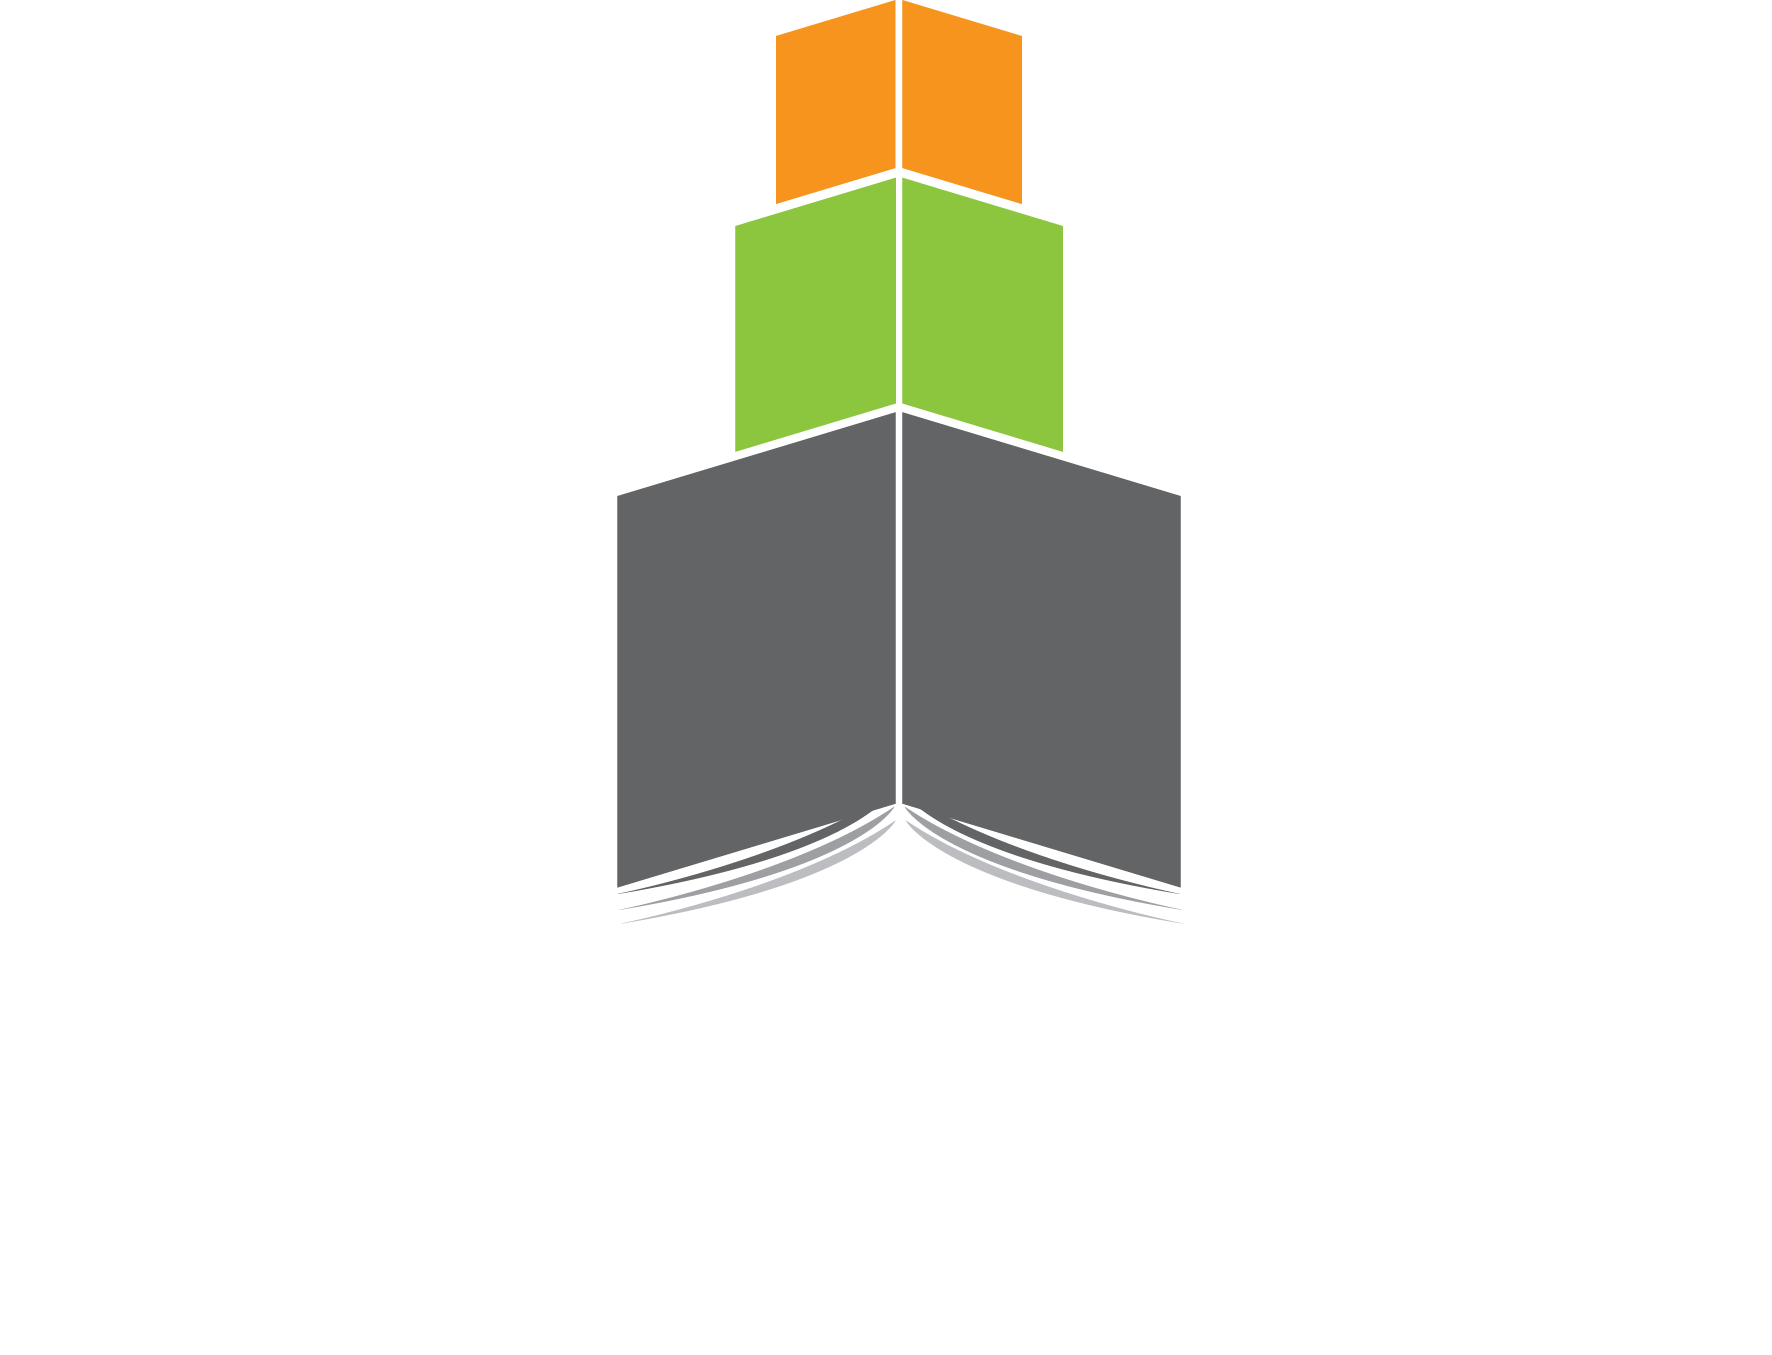 National Conference on Education AASA